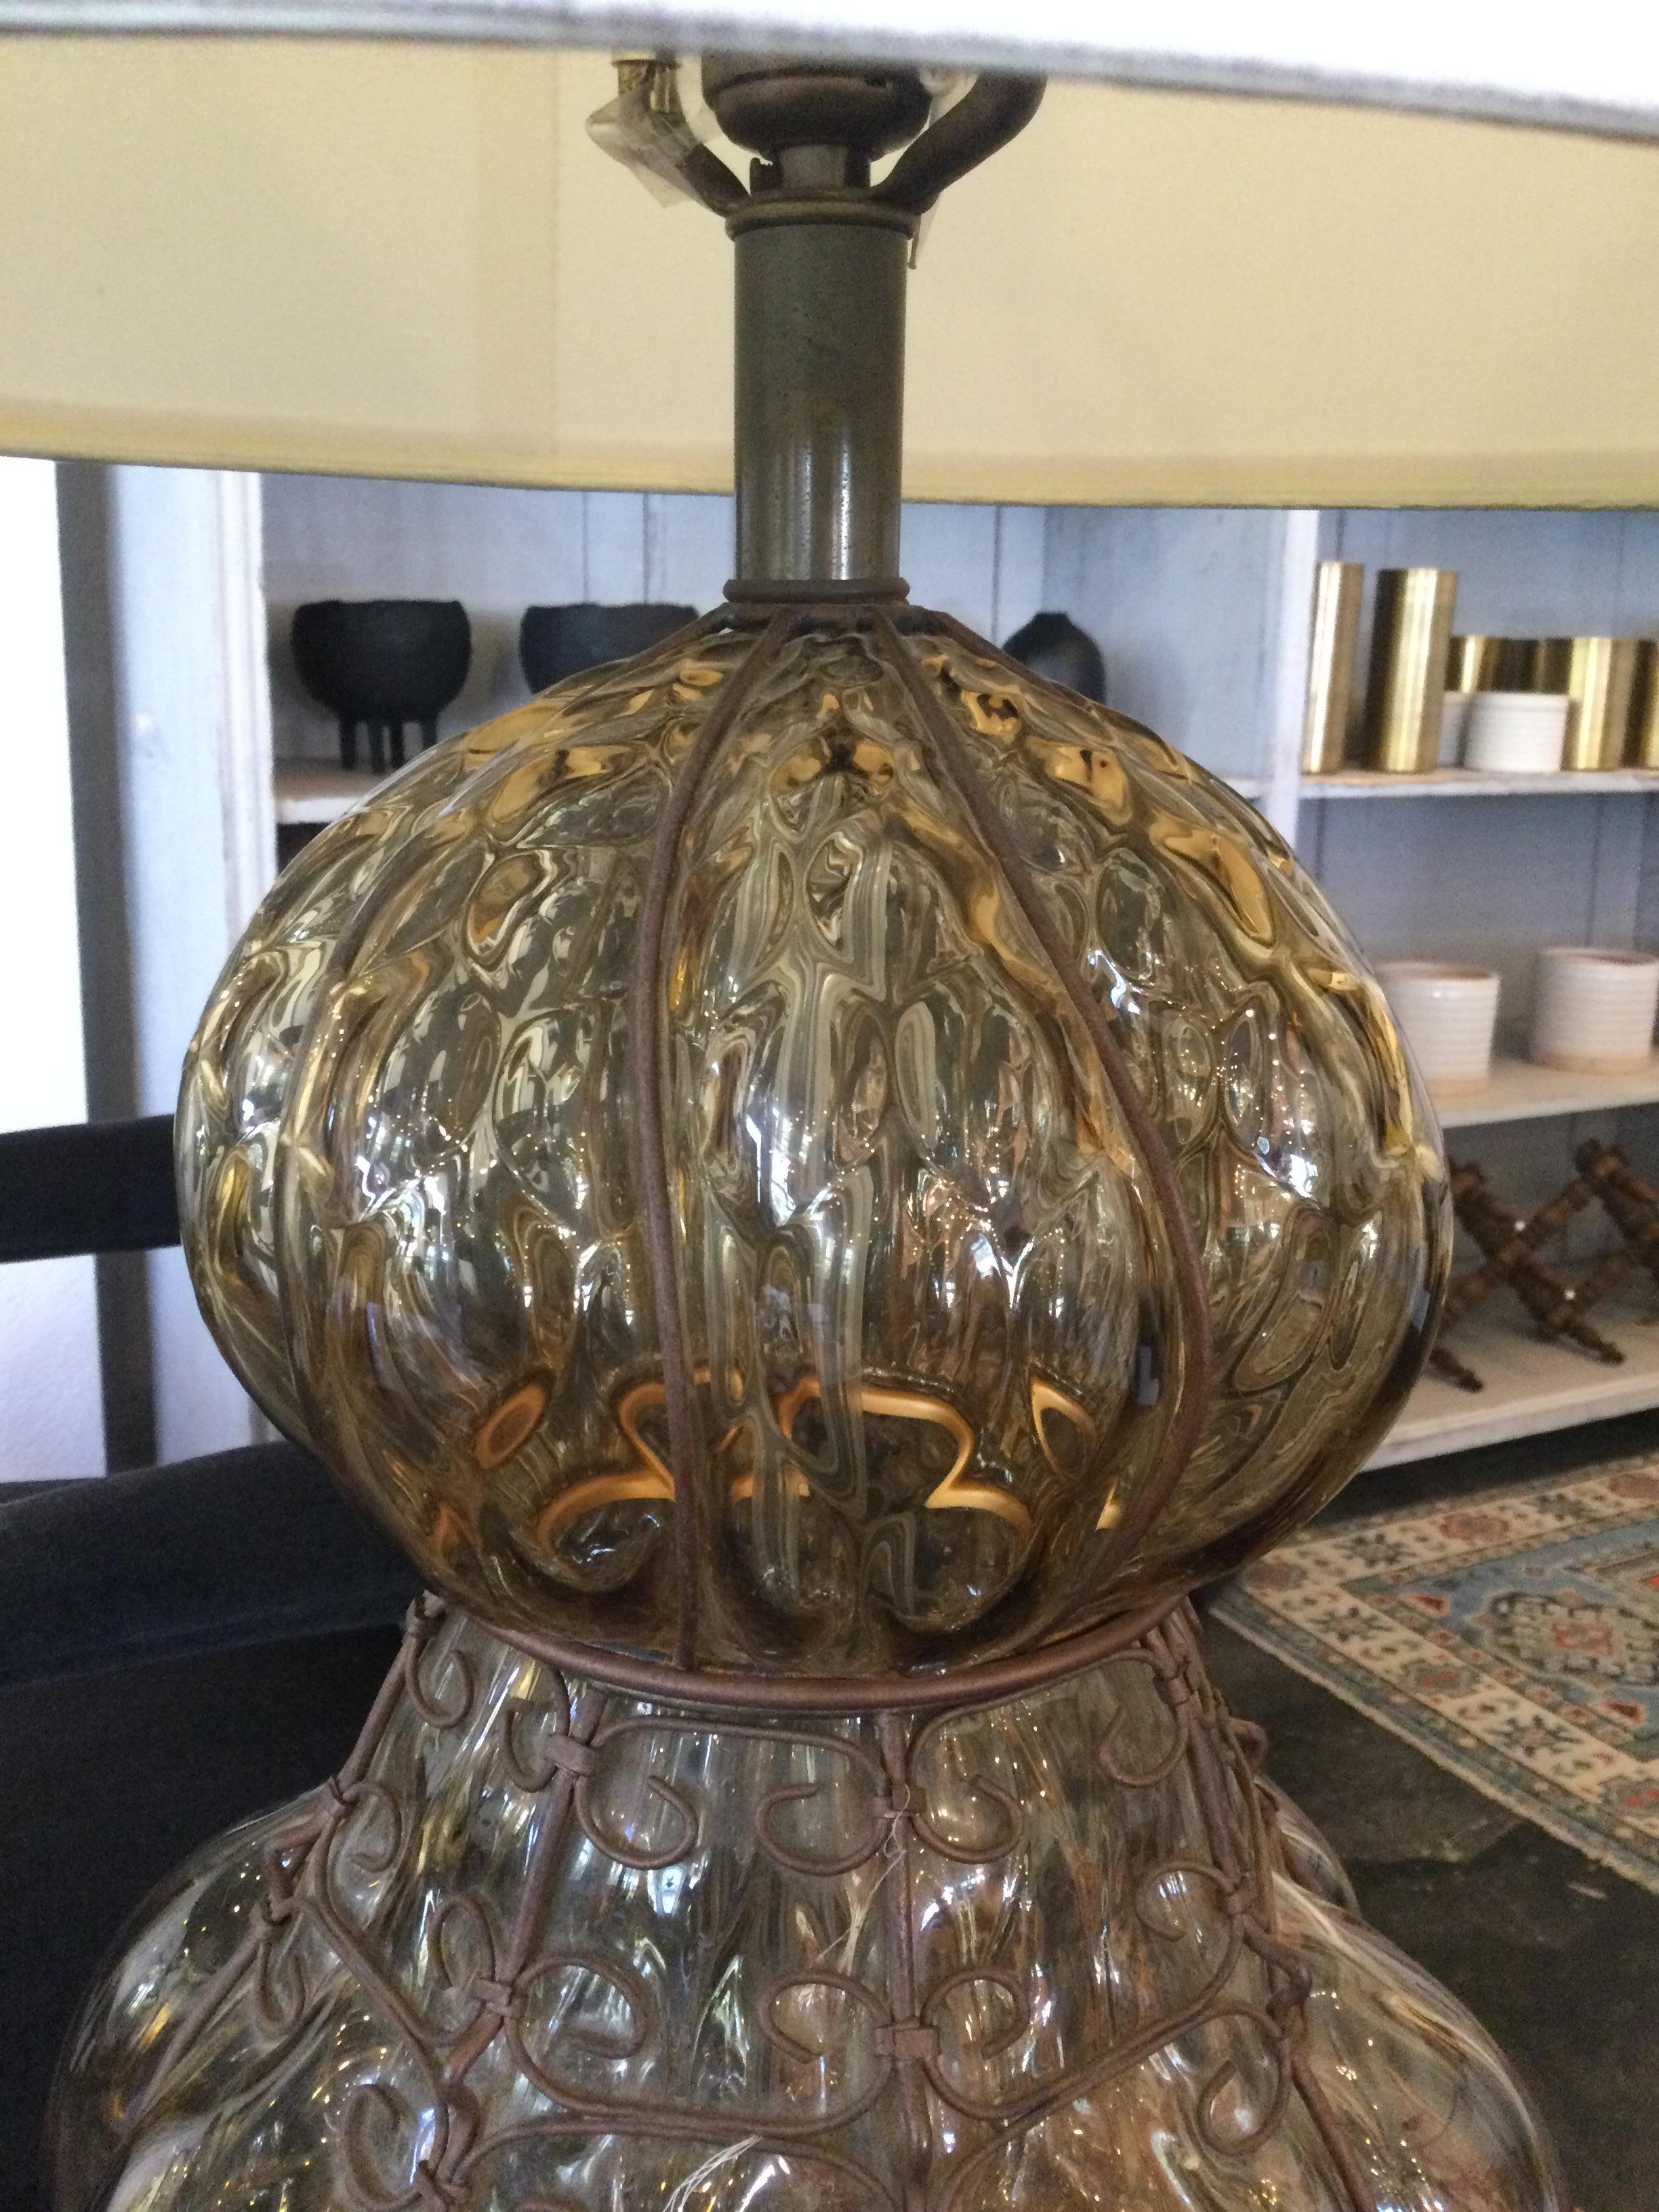 A rare and beautiful Murano Lamp with bronze base.

Murano Glass is made on the island of Murano, located within the city of Venice in Northern Italy. This glass is made from silica, soda, lime and potassium melted together in a special furnace at